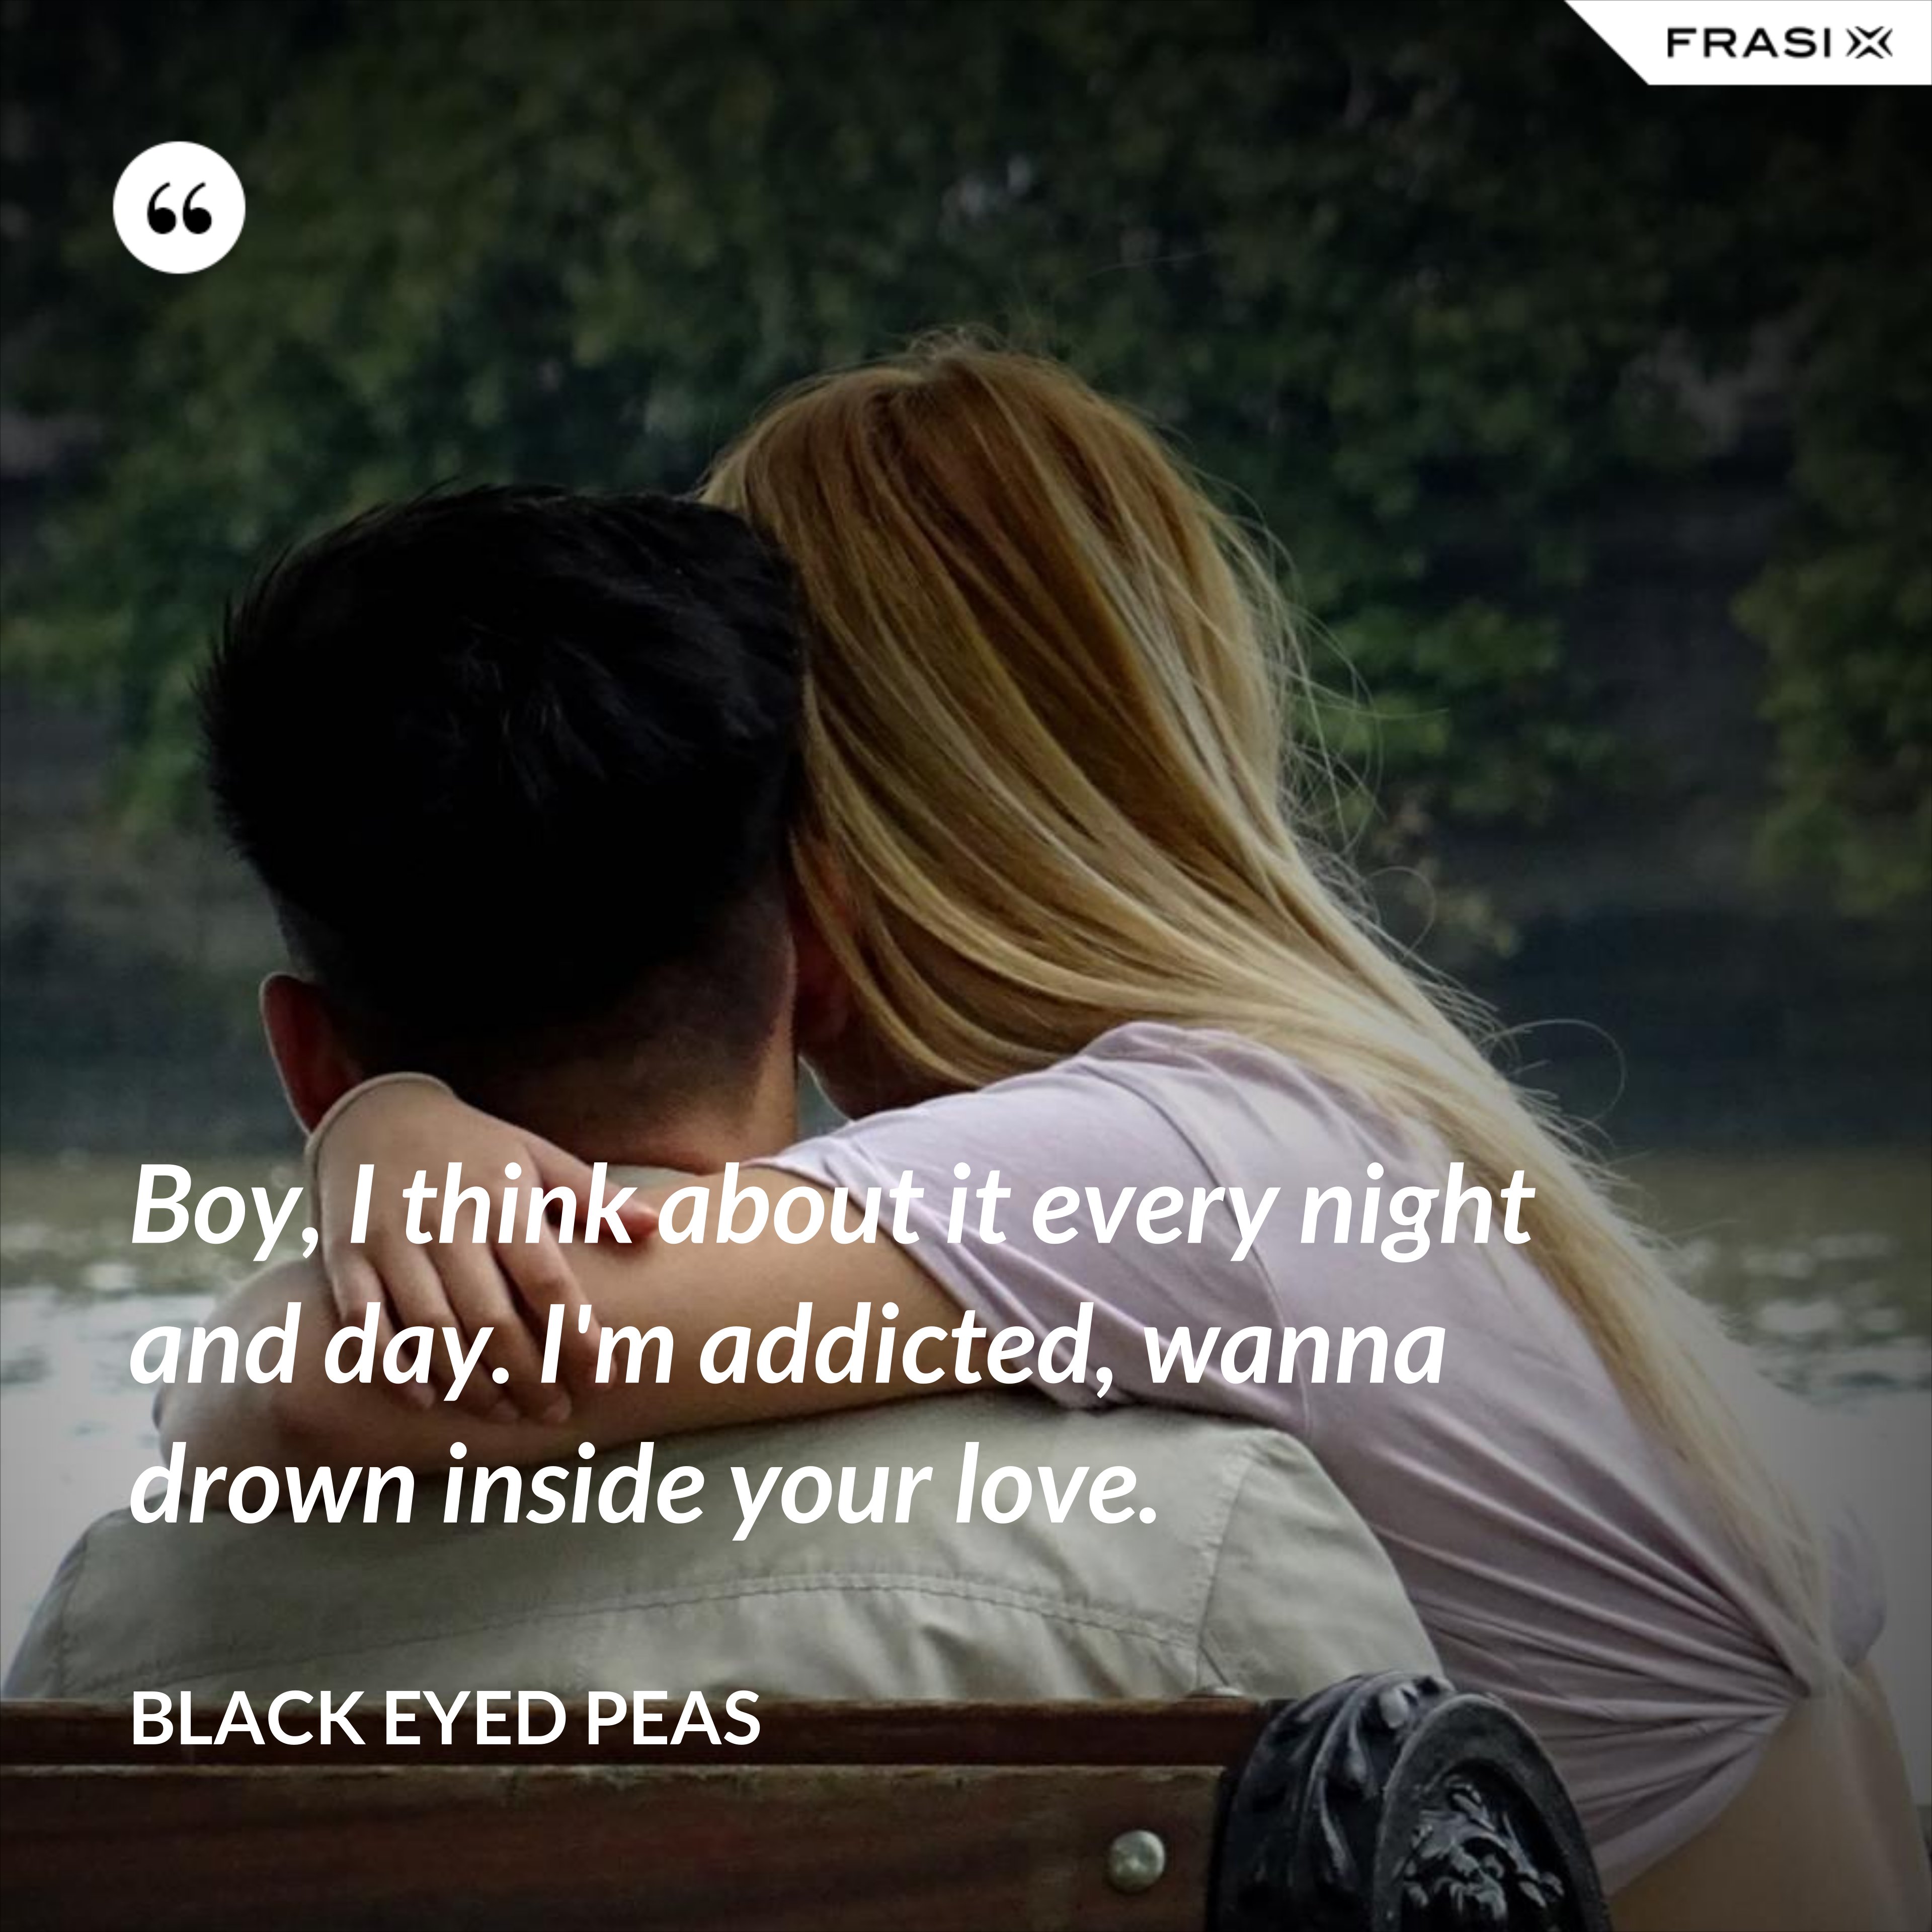 Boy, I think about it every night and day. I'm addicted, wanna drown inside your love. - Black Eyed Peas